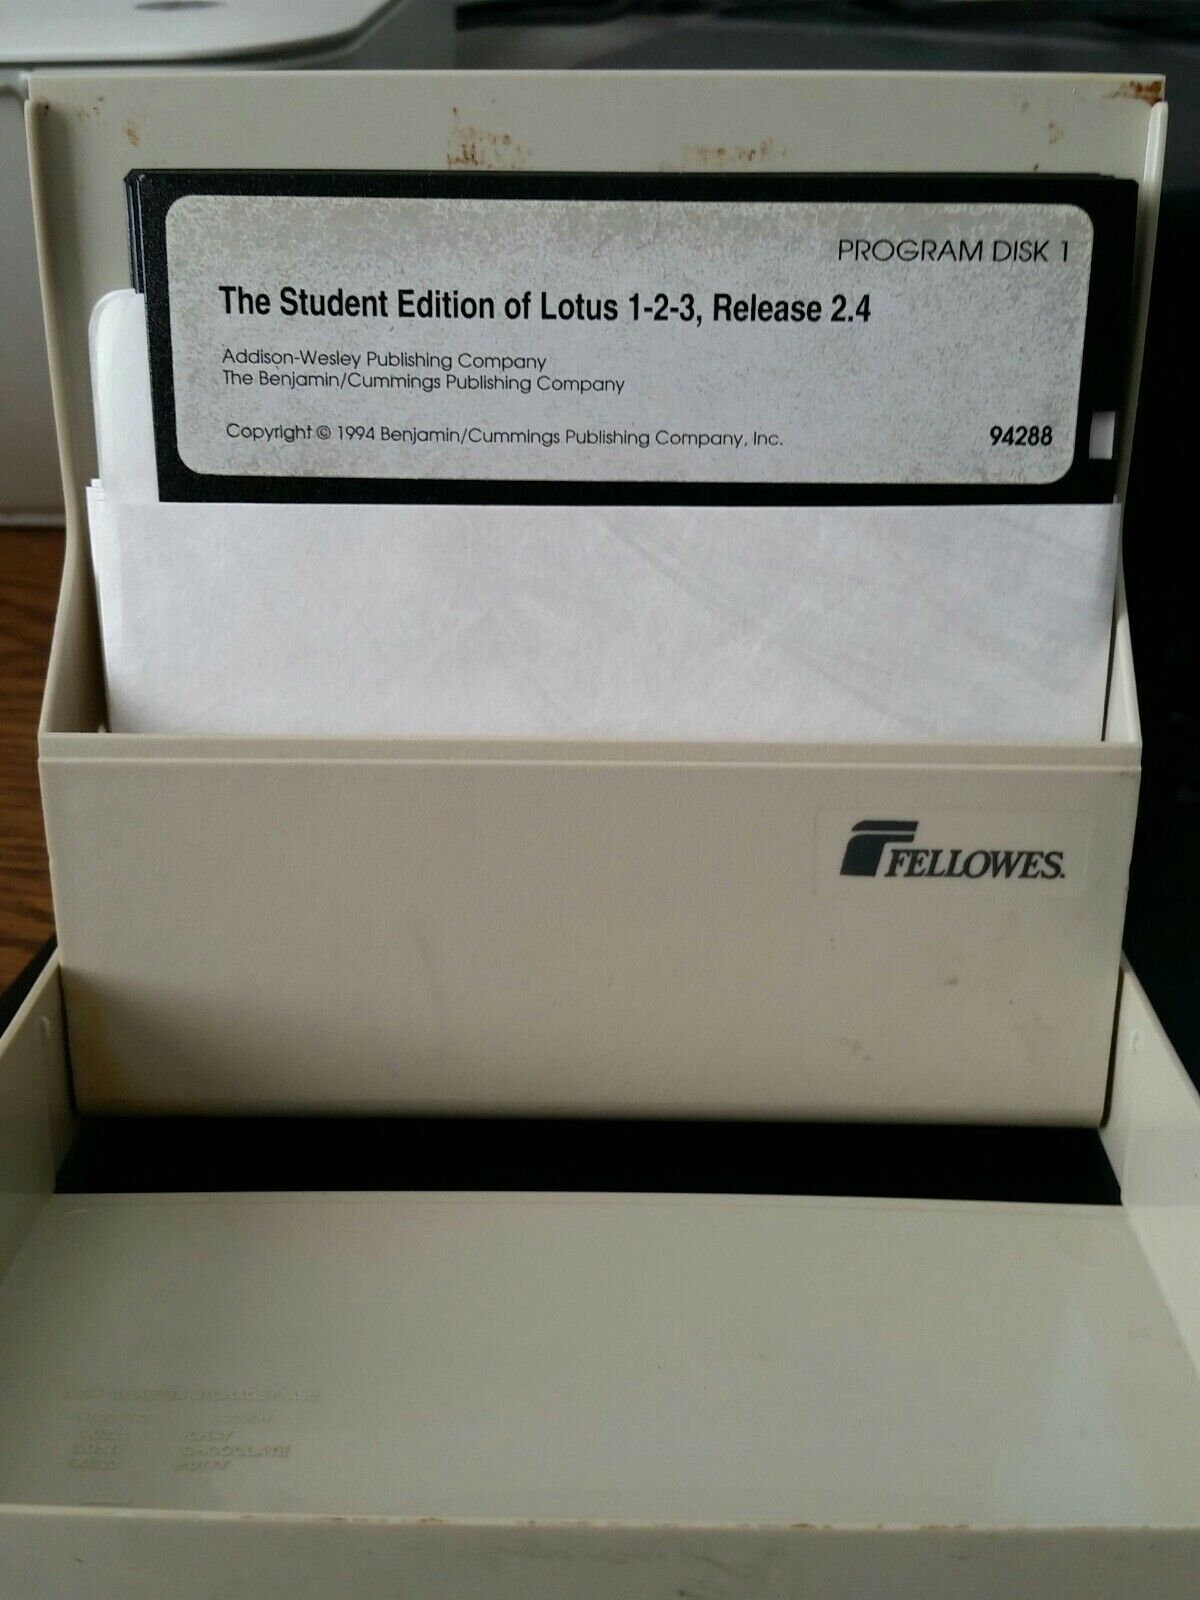 Lotus 1-2-3 Vintage Student Edition Release 2.4, 1994 - 6 Discs in Fellowes Box